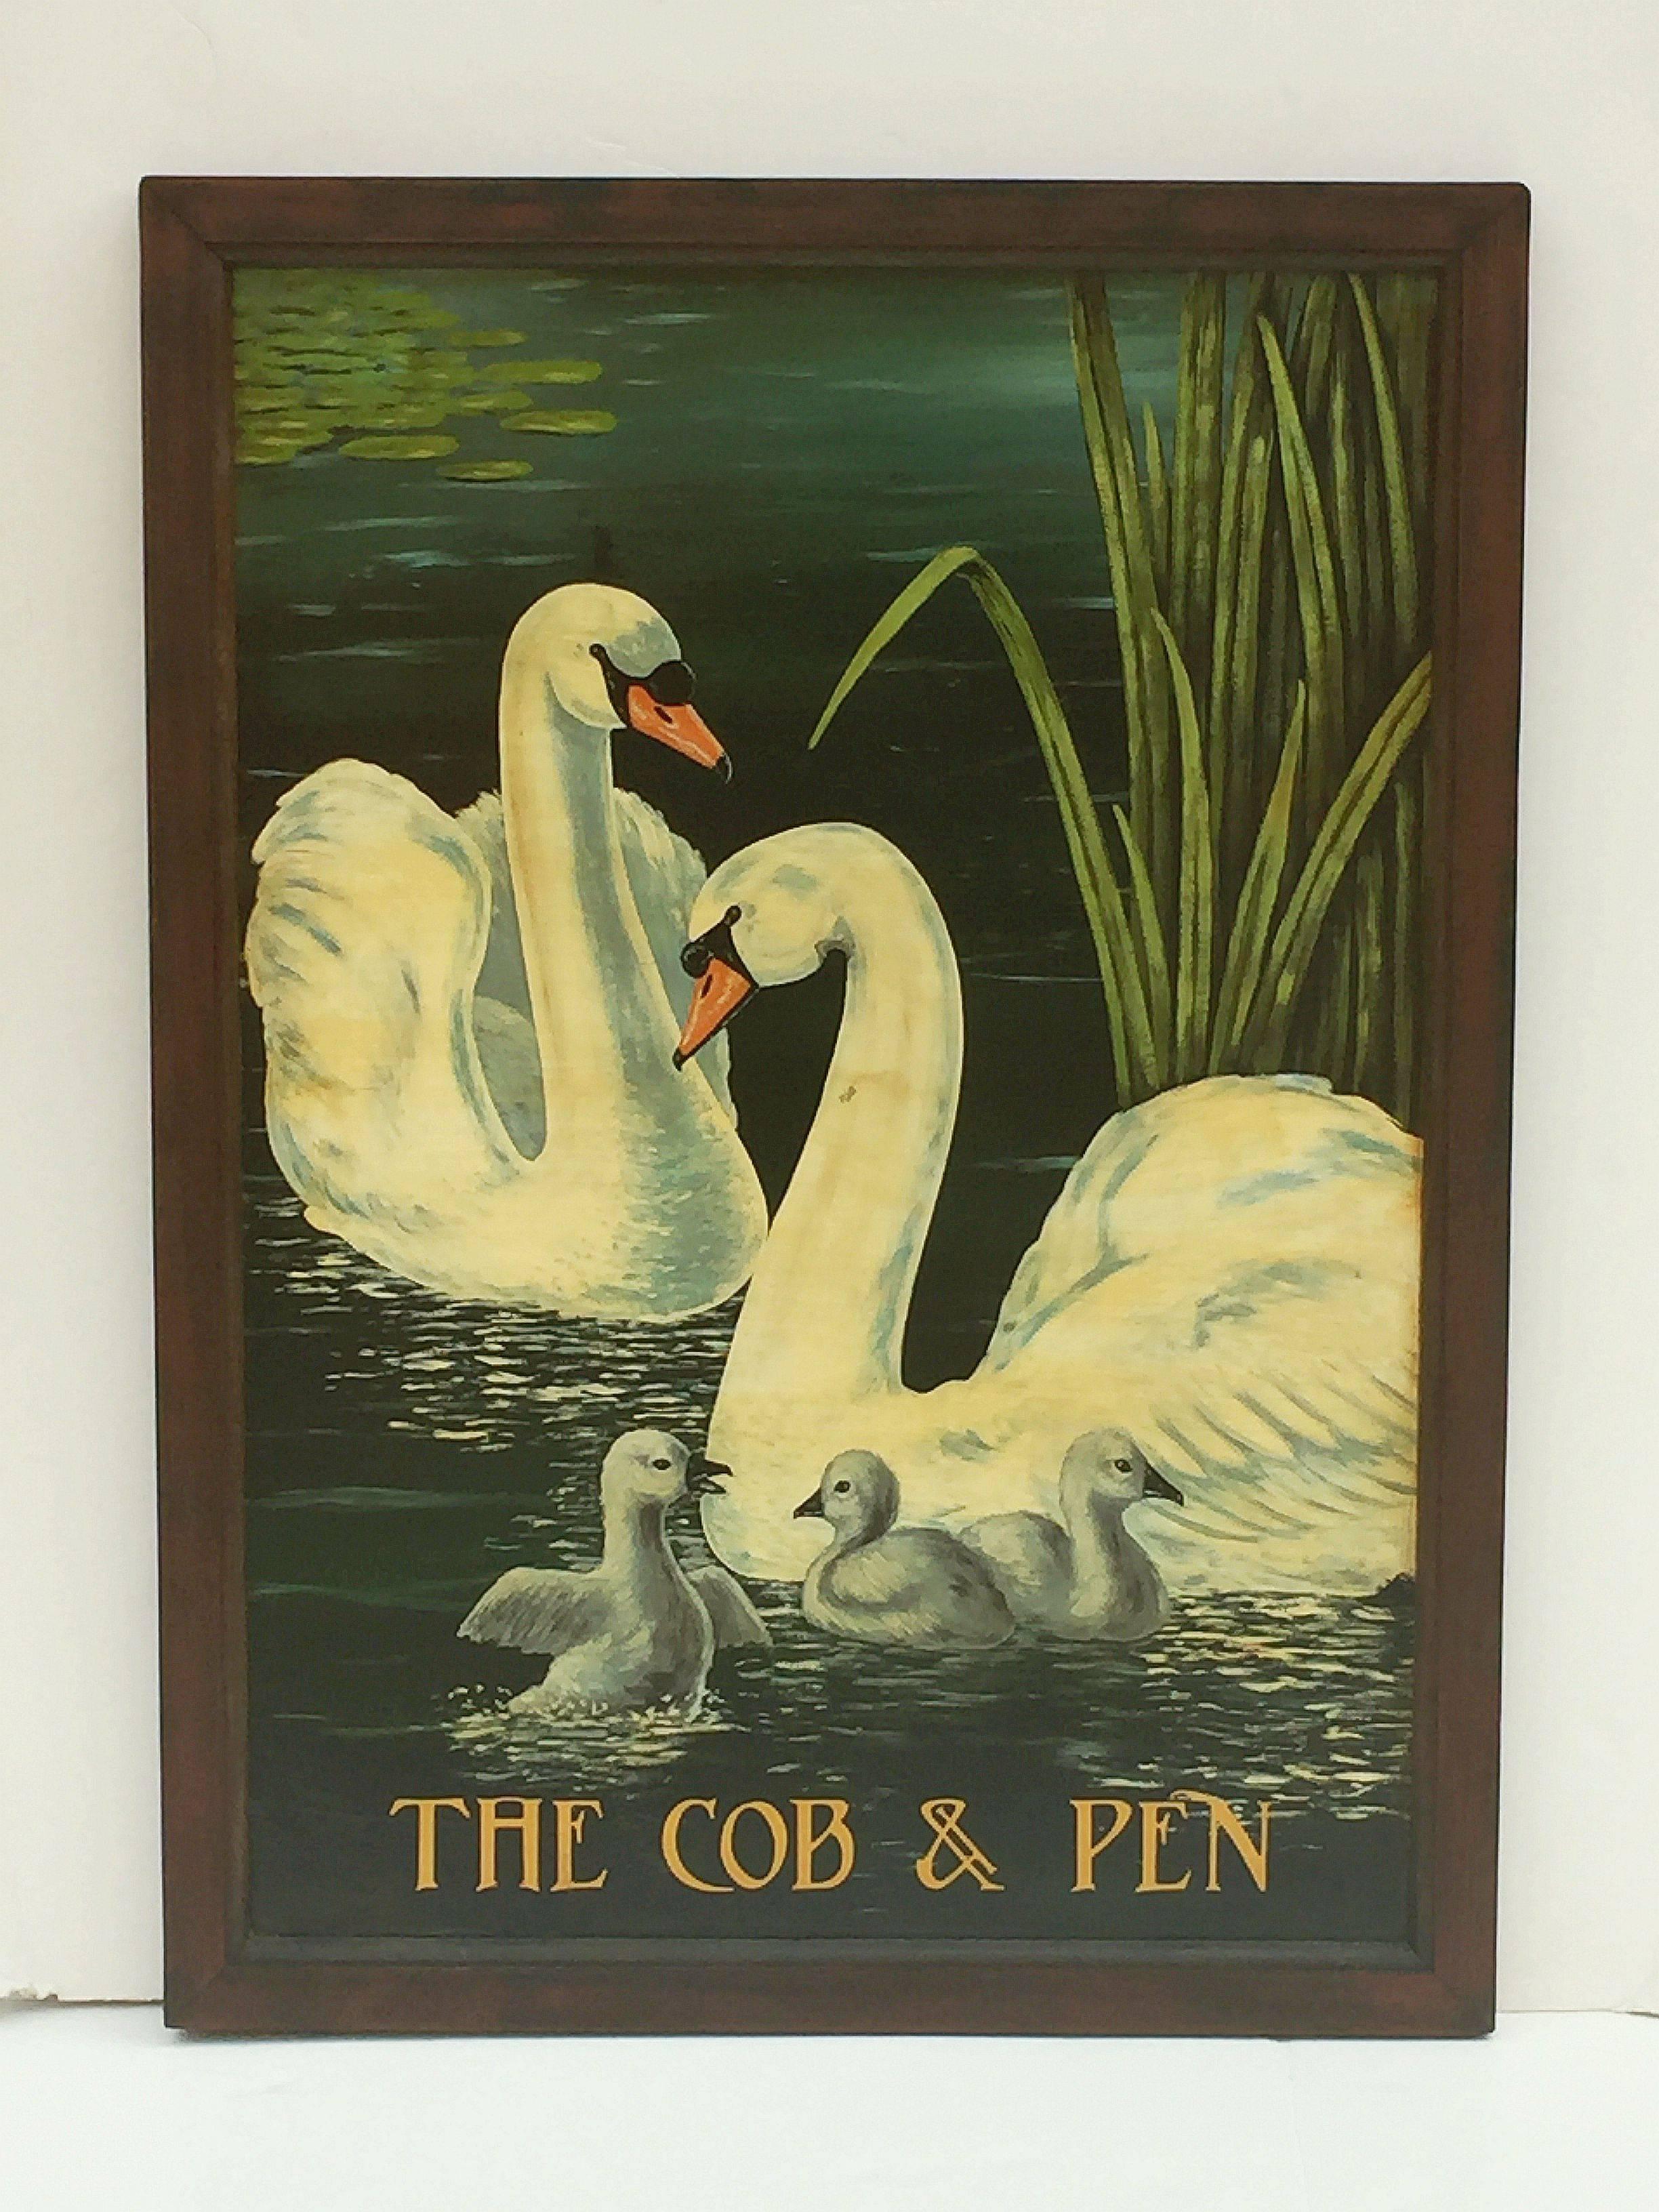 An authentic English pub sign (two-sided) featuring a painting of two adult swans with their three children, next to reeds with lily pads in the background, entitled: The Cob & Pen.

The male swan, called the cob, helps the female, known as a pen,